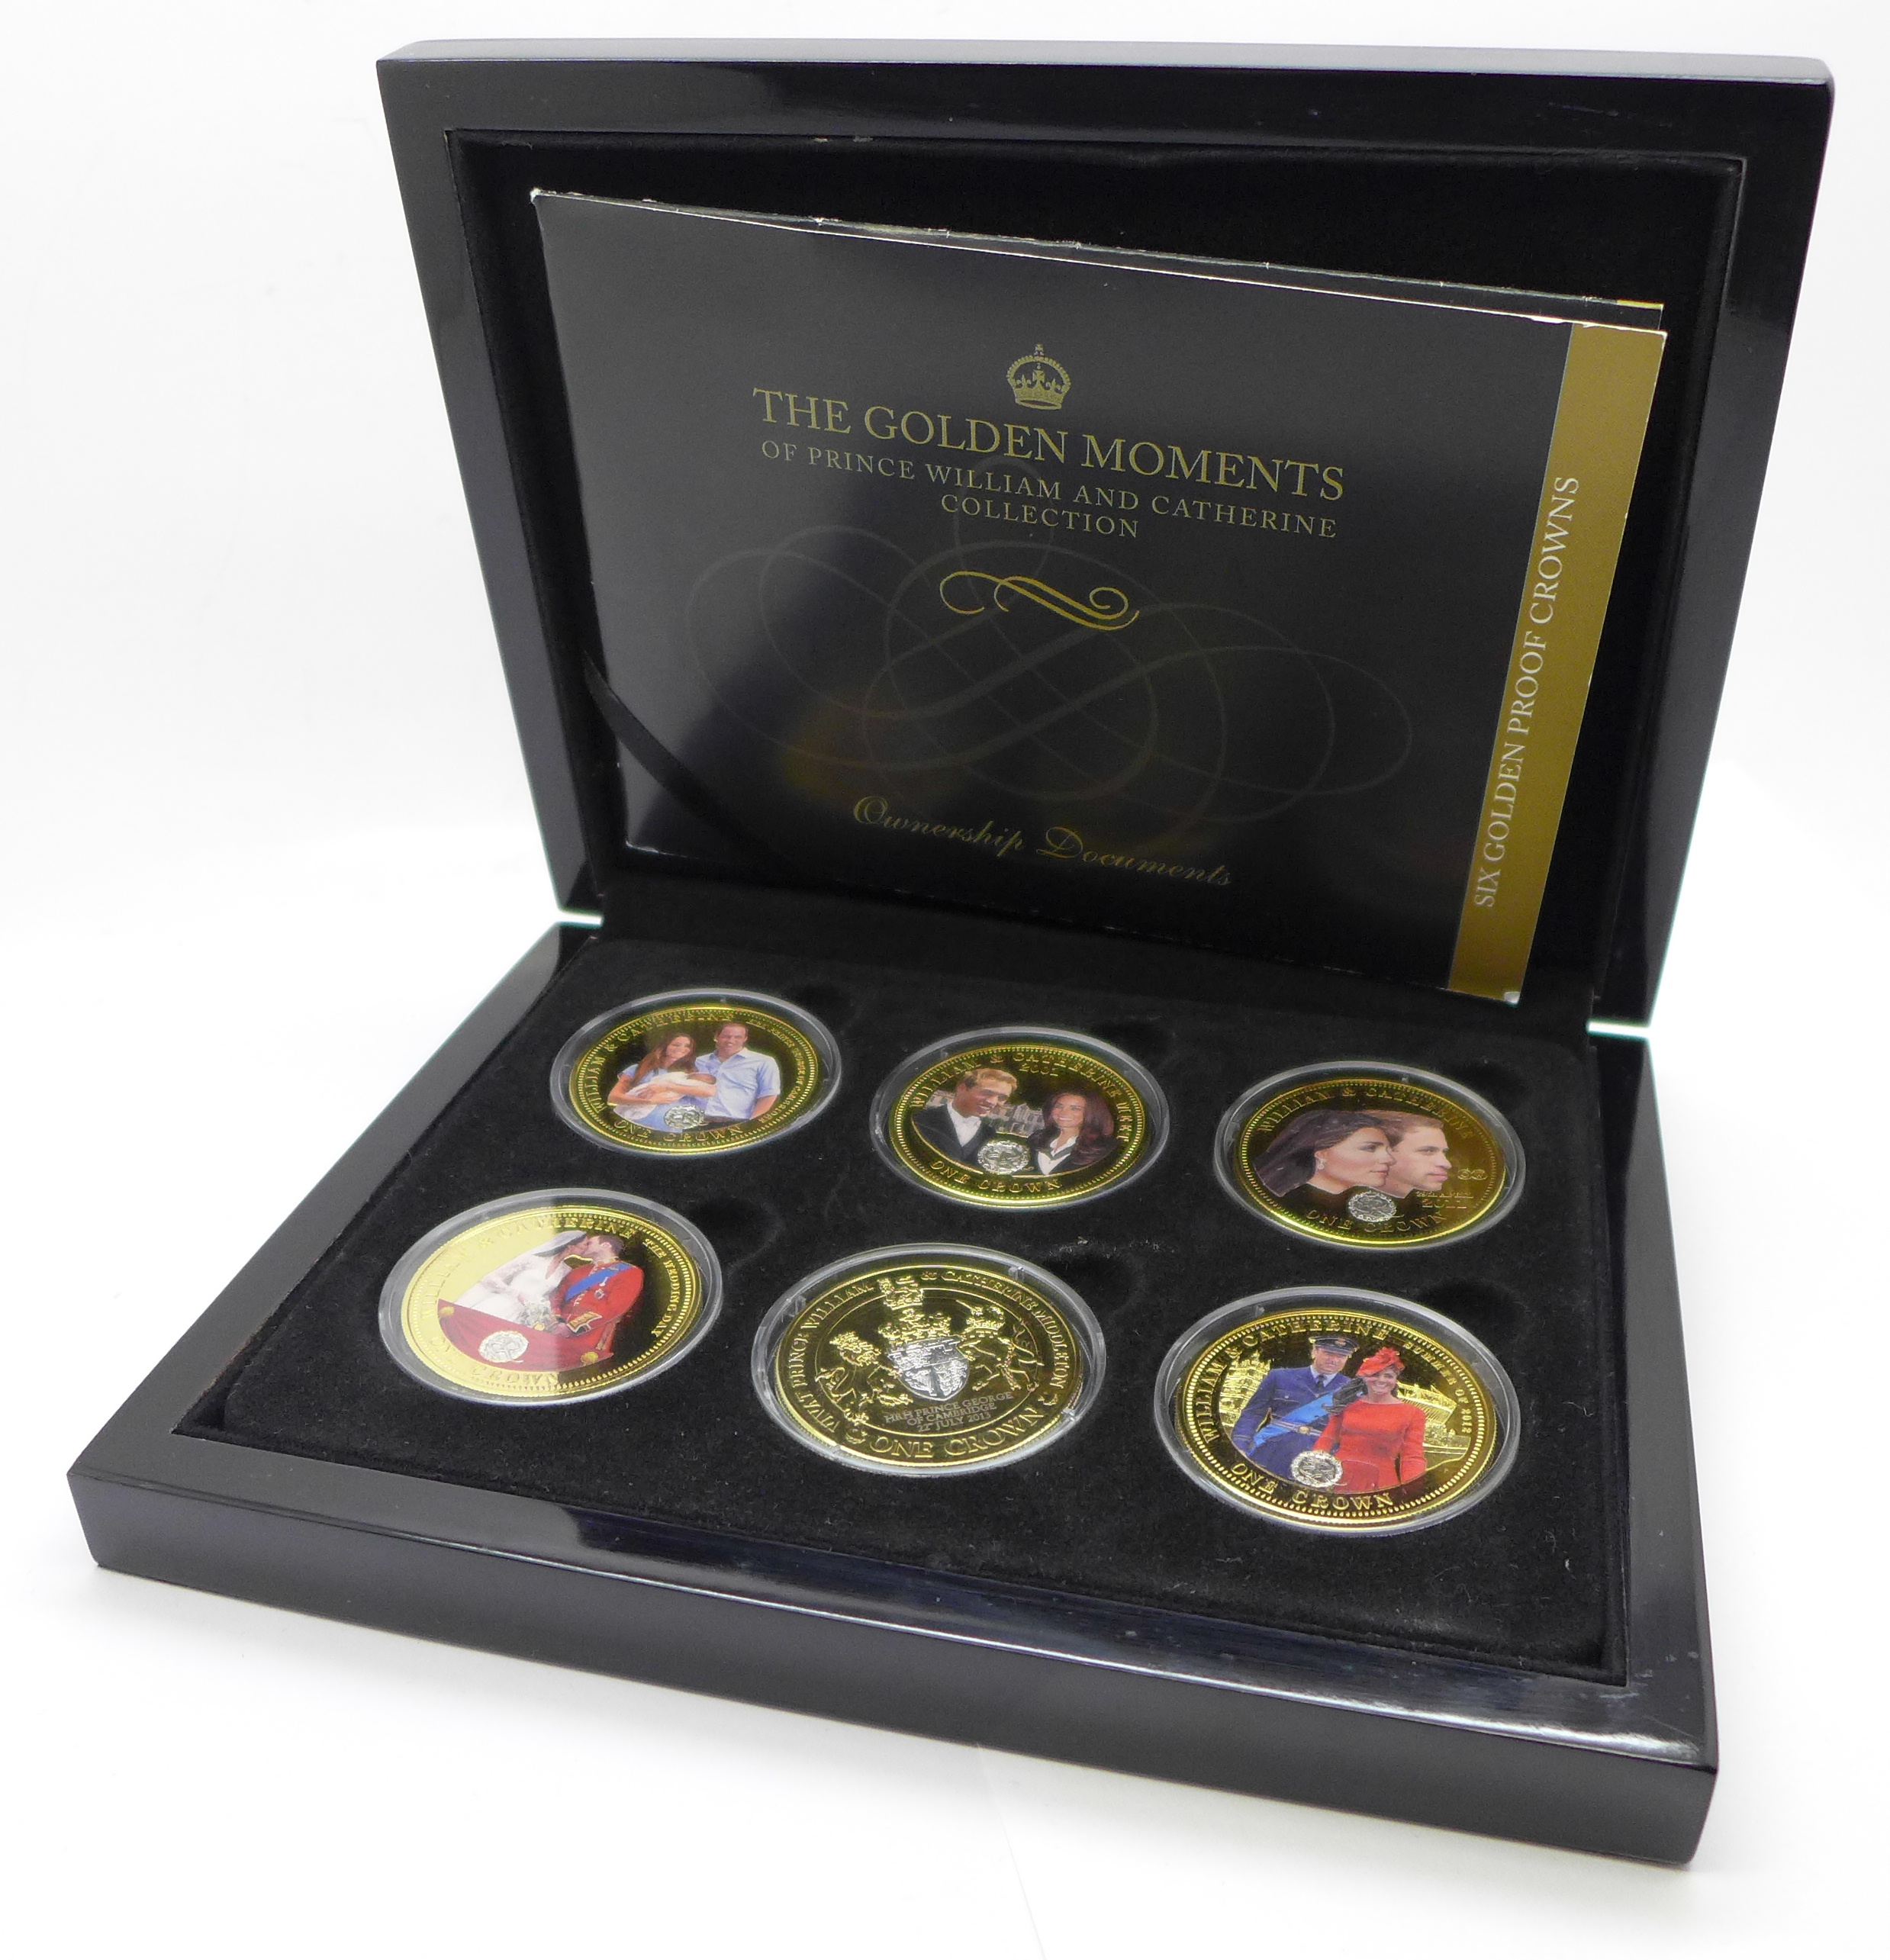 A set of The Golden Moments of Prince William and Catherine, six gold layered proof crowns